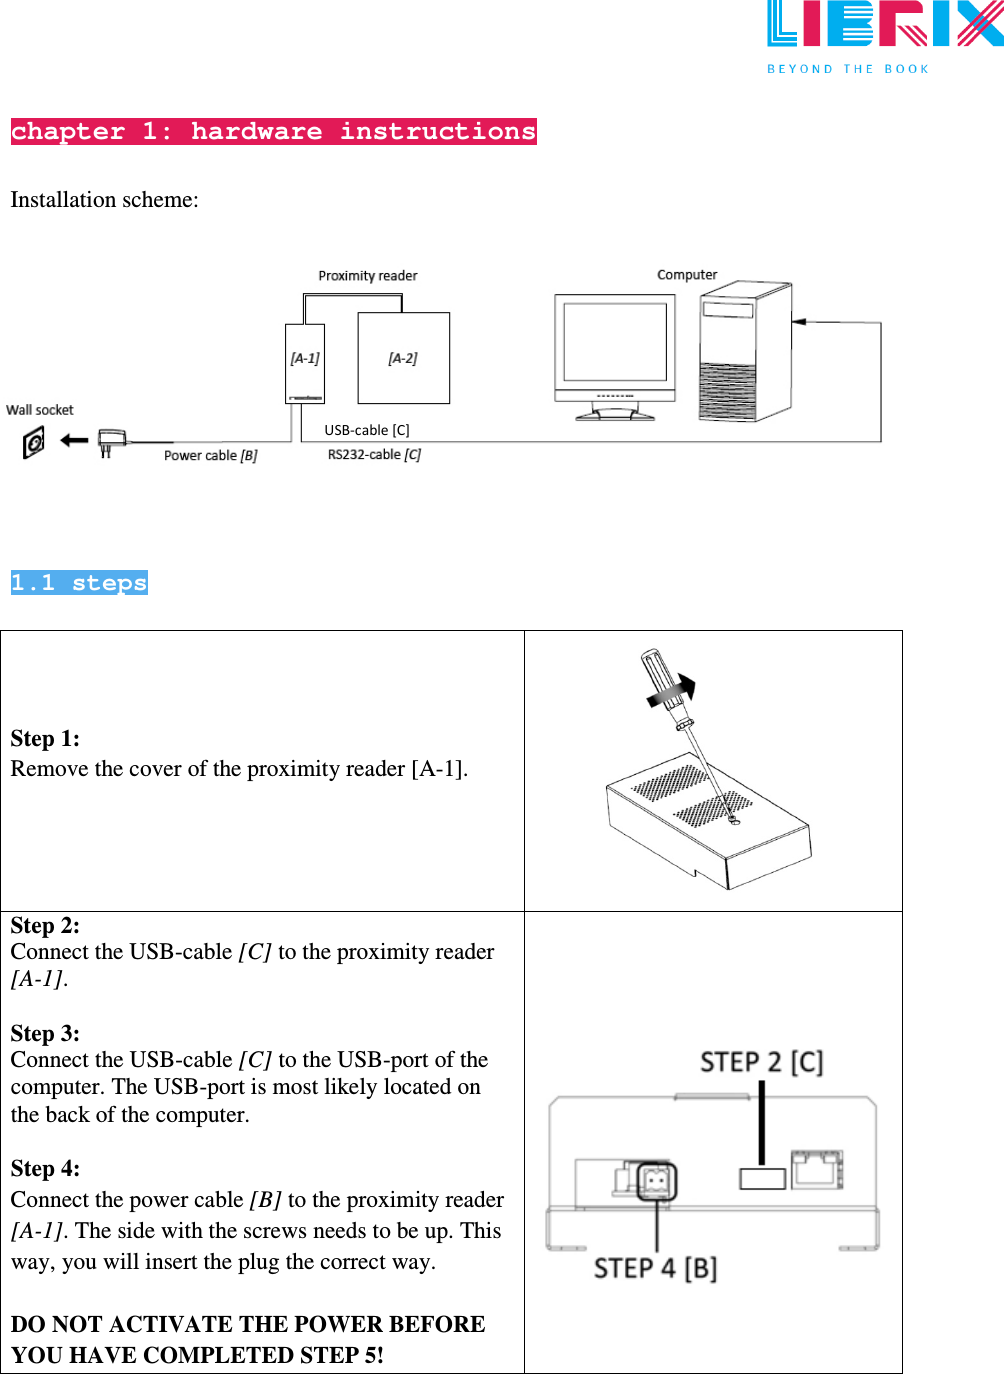  chapter 1: hardware instructions  Installation scheme:              1.1 steps     Step 1: Remove the cover of the proximity reader [A-1].      Step 2: Connect the USB-cable [C] to the proximity reader [A-1].   Step 3: Connect the USB-cable [C] to the USB-port of the computer. The USB-port is most likely located on the back of the computer.  Step 4:  Connect the power cable [B] to the proximity reader [A-1]. The side with the screws needs to be up. This way, you will insert the plug the correct way.  DO NOT ACTIVATE THE POWER BEFORE YOU HAVE COMPLETED STEP 5!           USB-cable [C] 